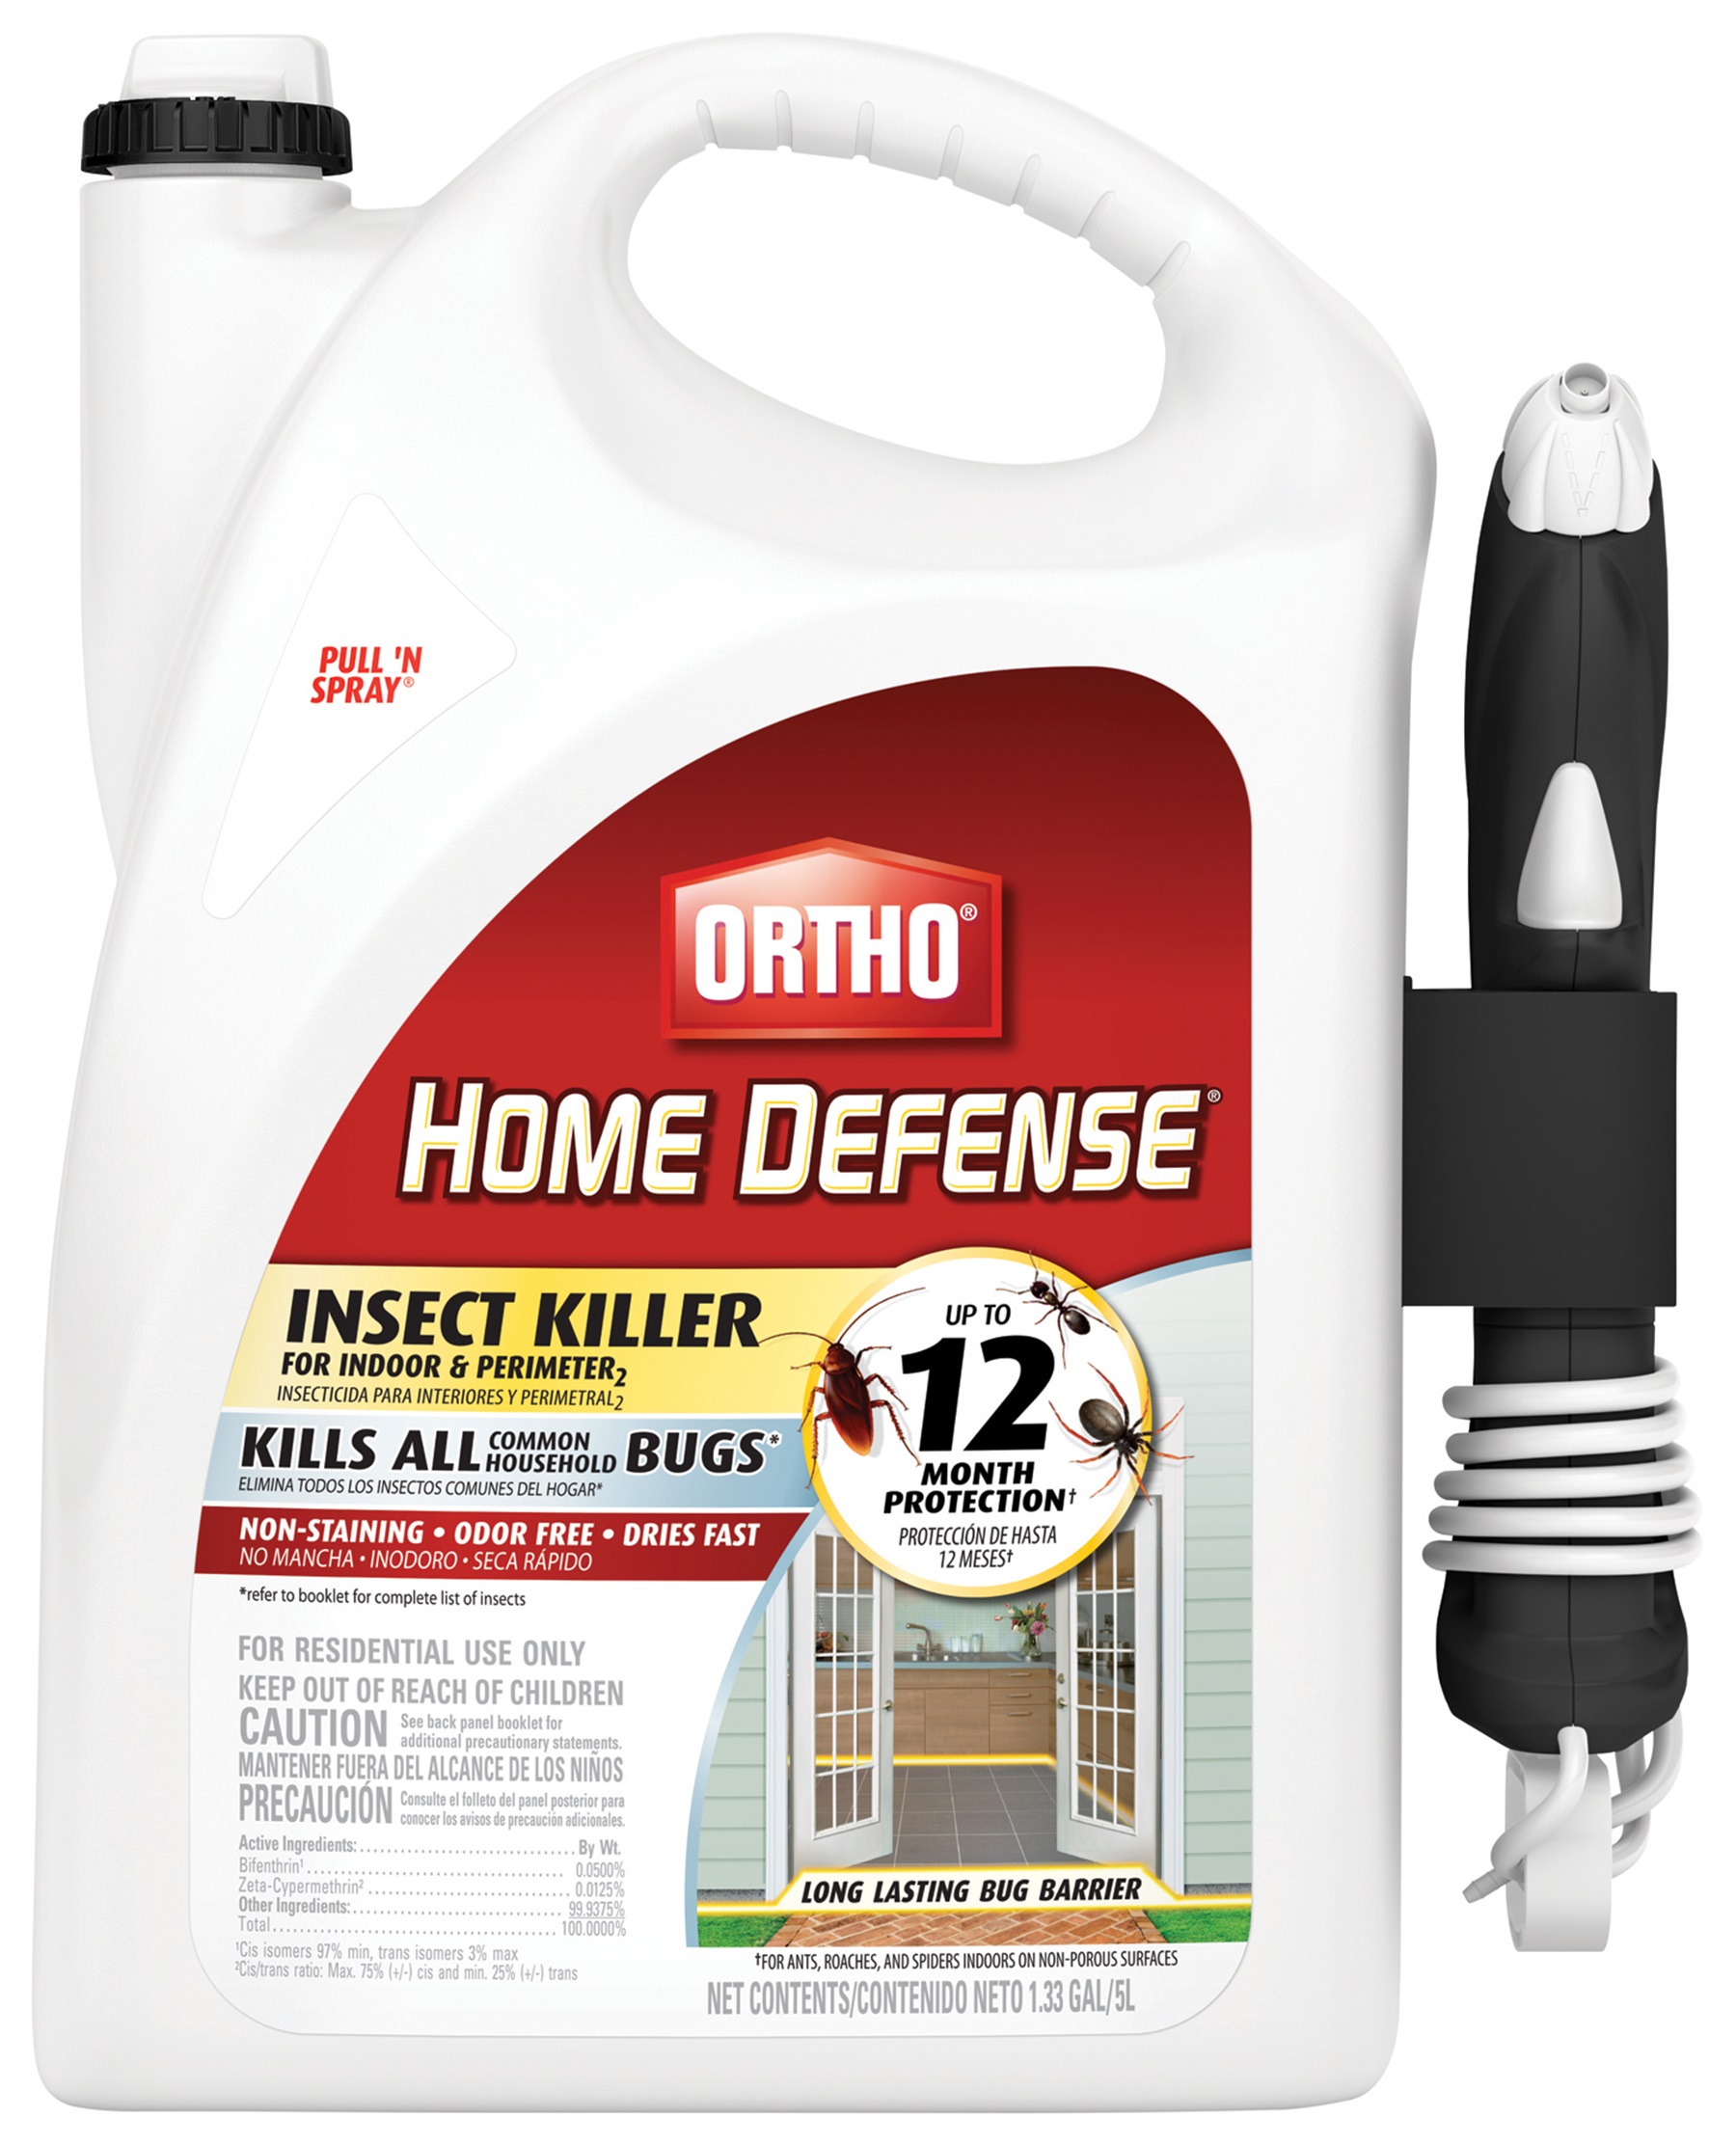 Ortho Home Defense Insect Killer for Indoor and Perimeter Ready to Use, 1 Gallon - 0220910